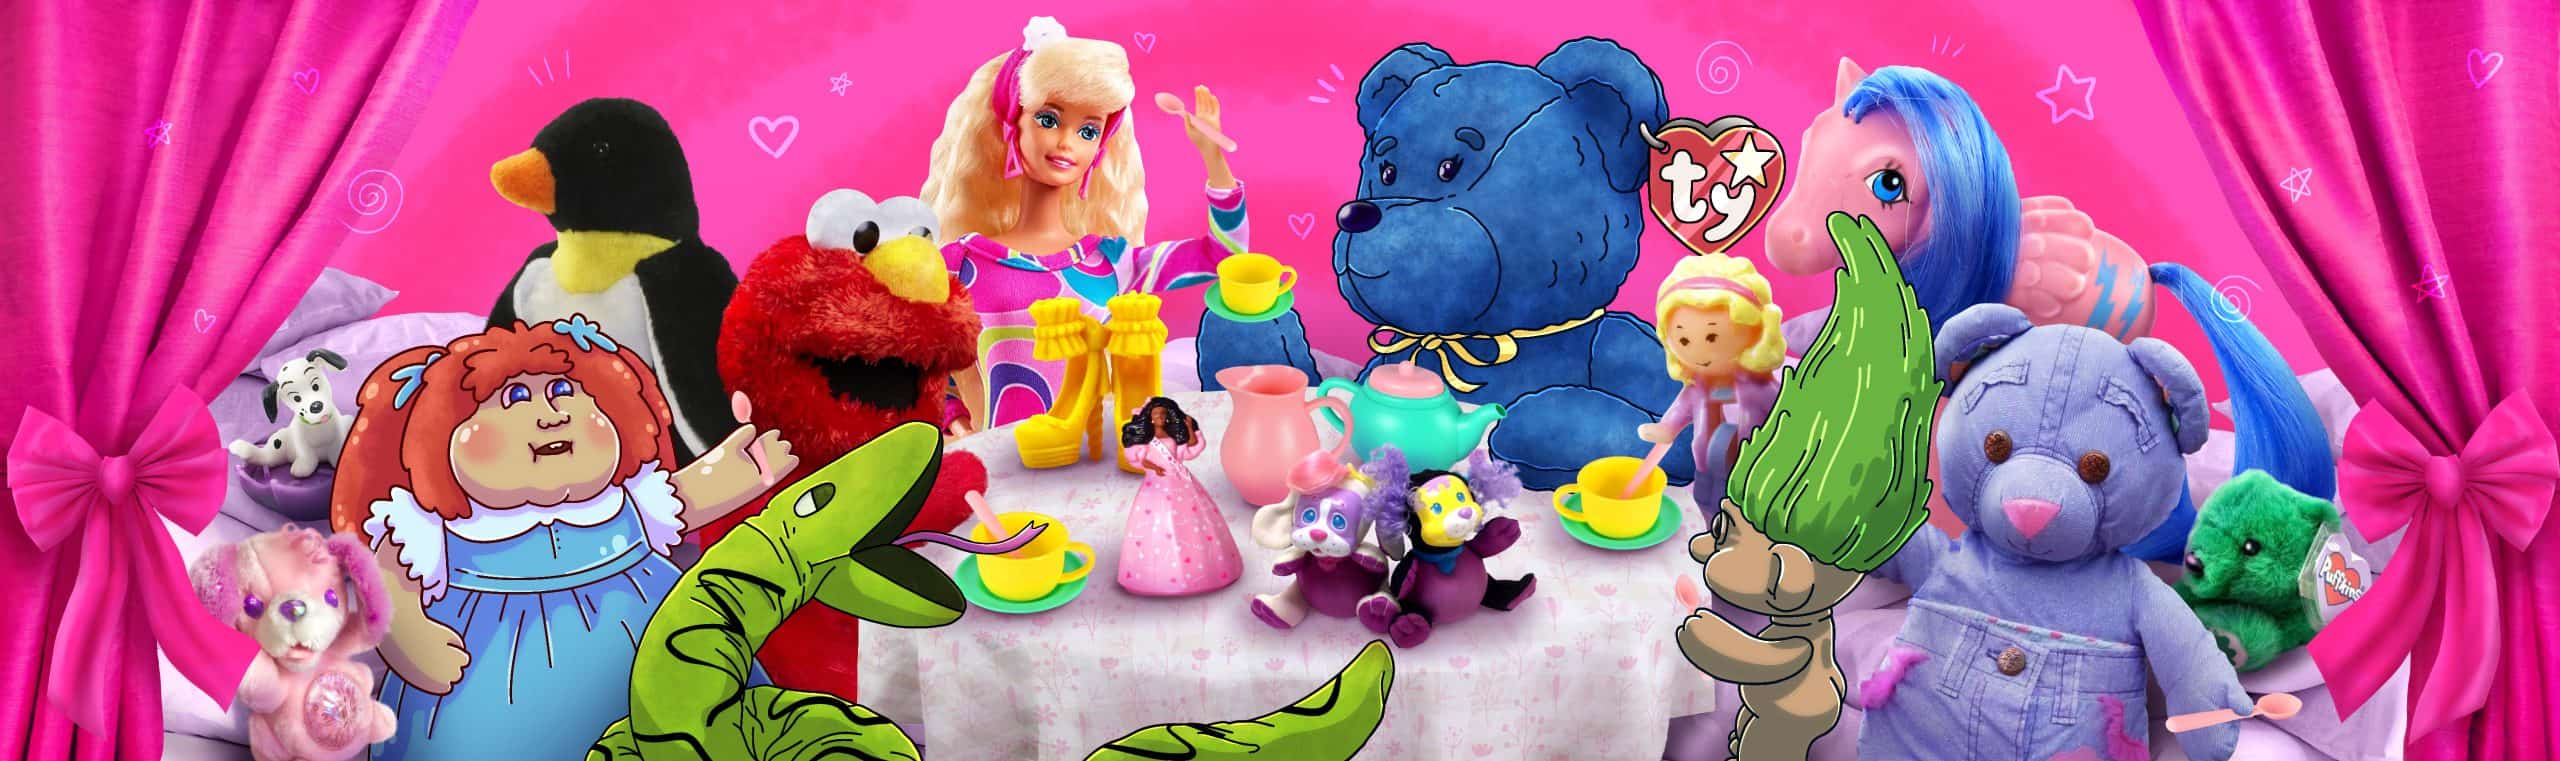 90s dolls and soft toys